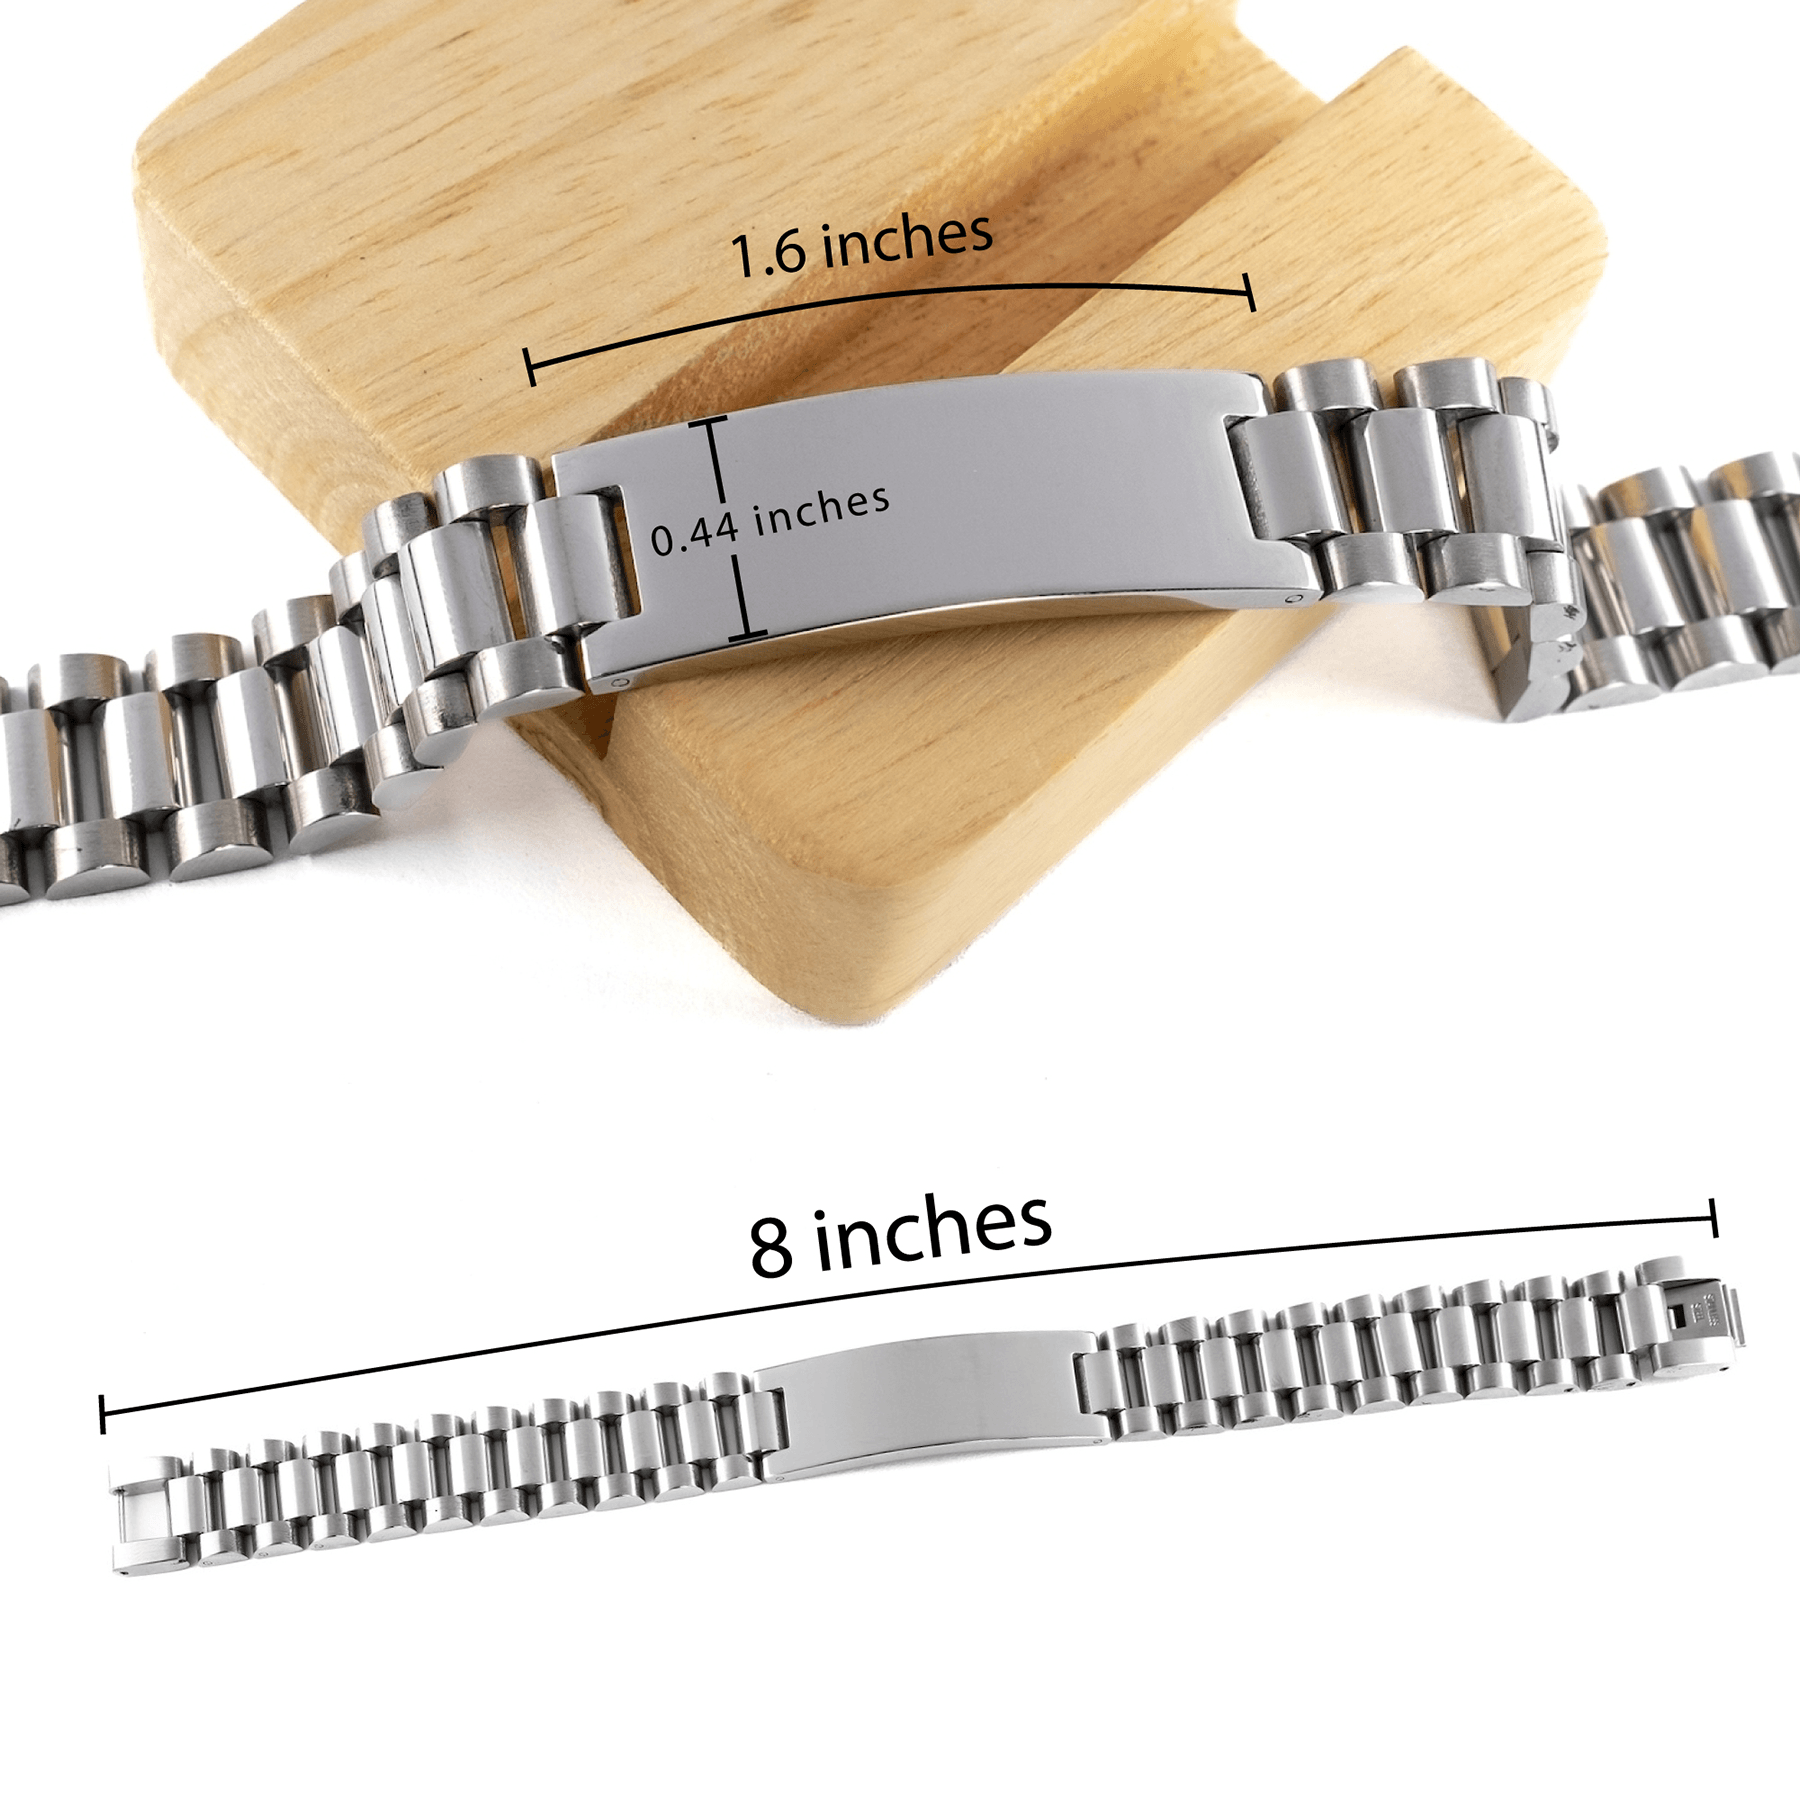 Remarkable Pharmacy Technician Gifts, Your dedication and hard work, Inspirational Birthday Christmas Unique Ladder Stainless Steel Bracelet For Pharmacy Technician, Coworkers, Men, Women, Friends - Mallard Moon Gift Shop